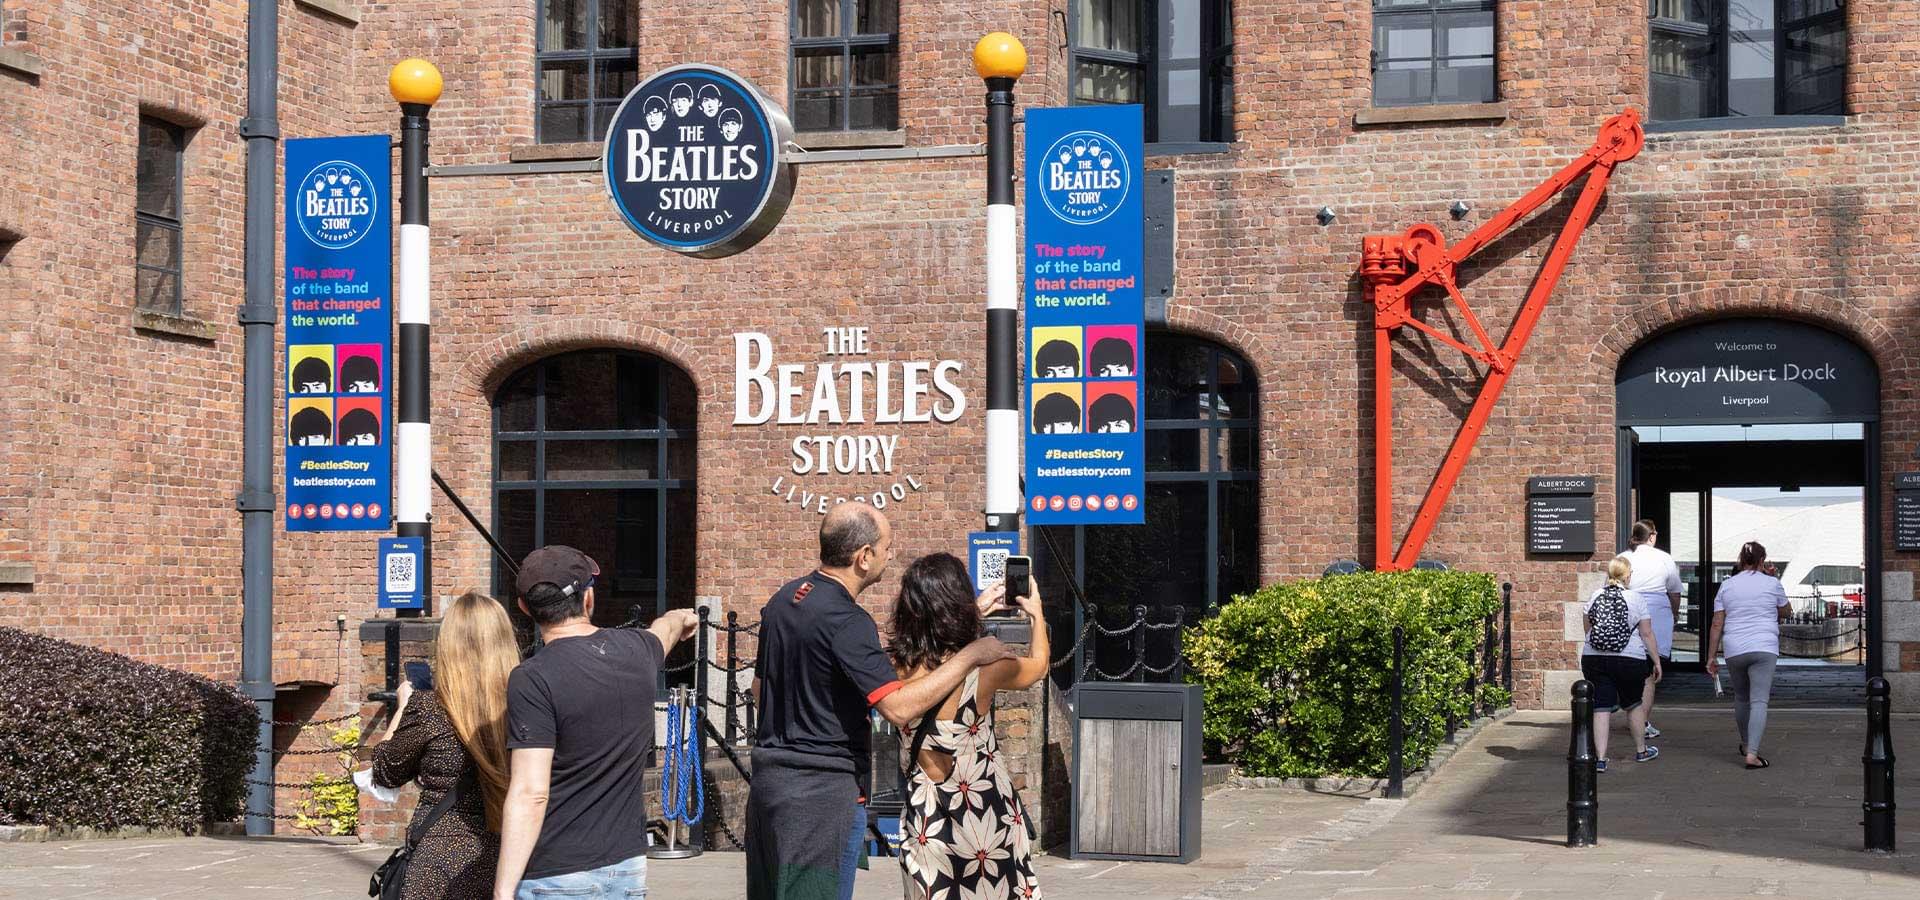 The Beatles Story Overview